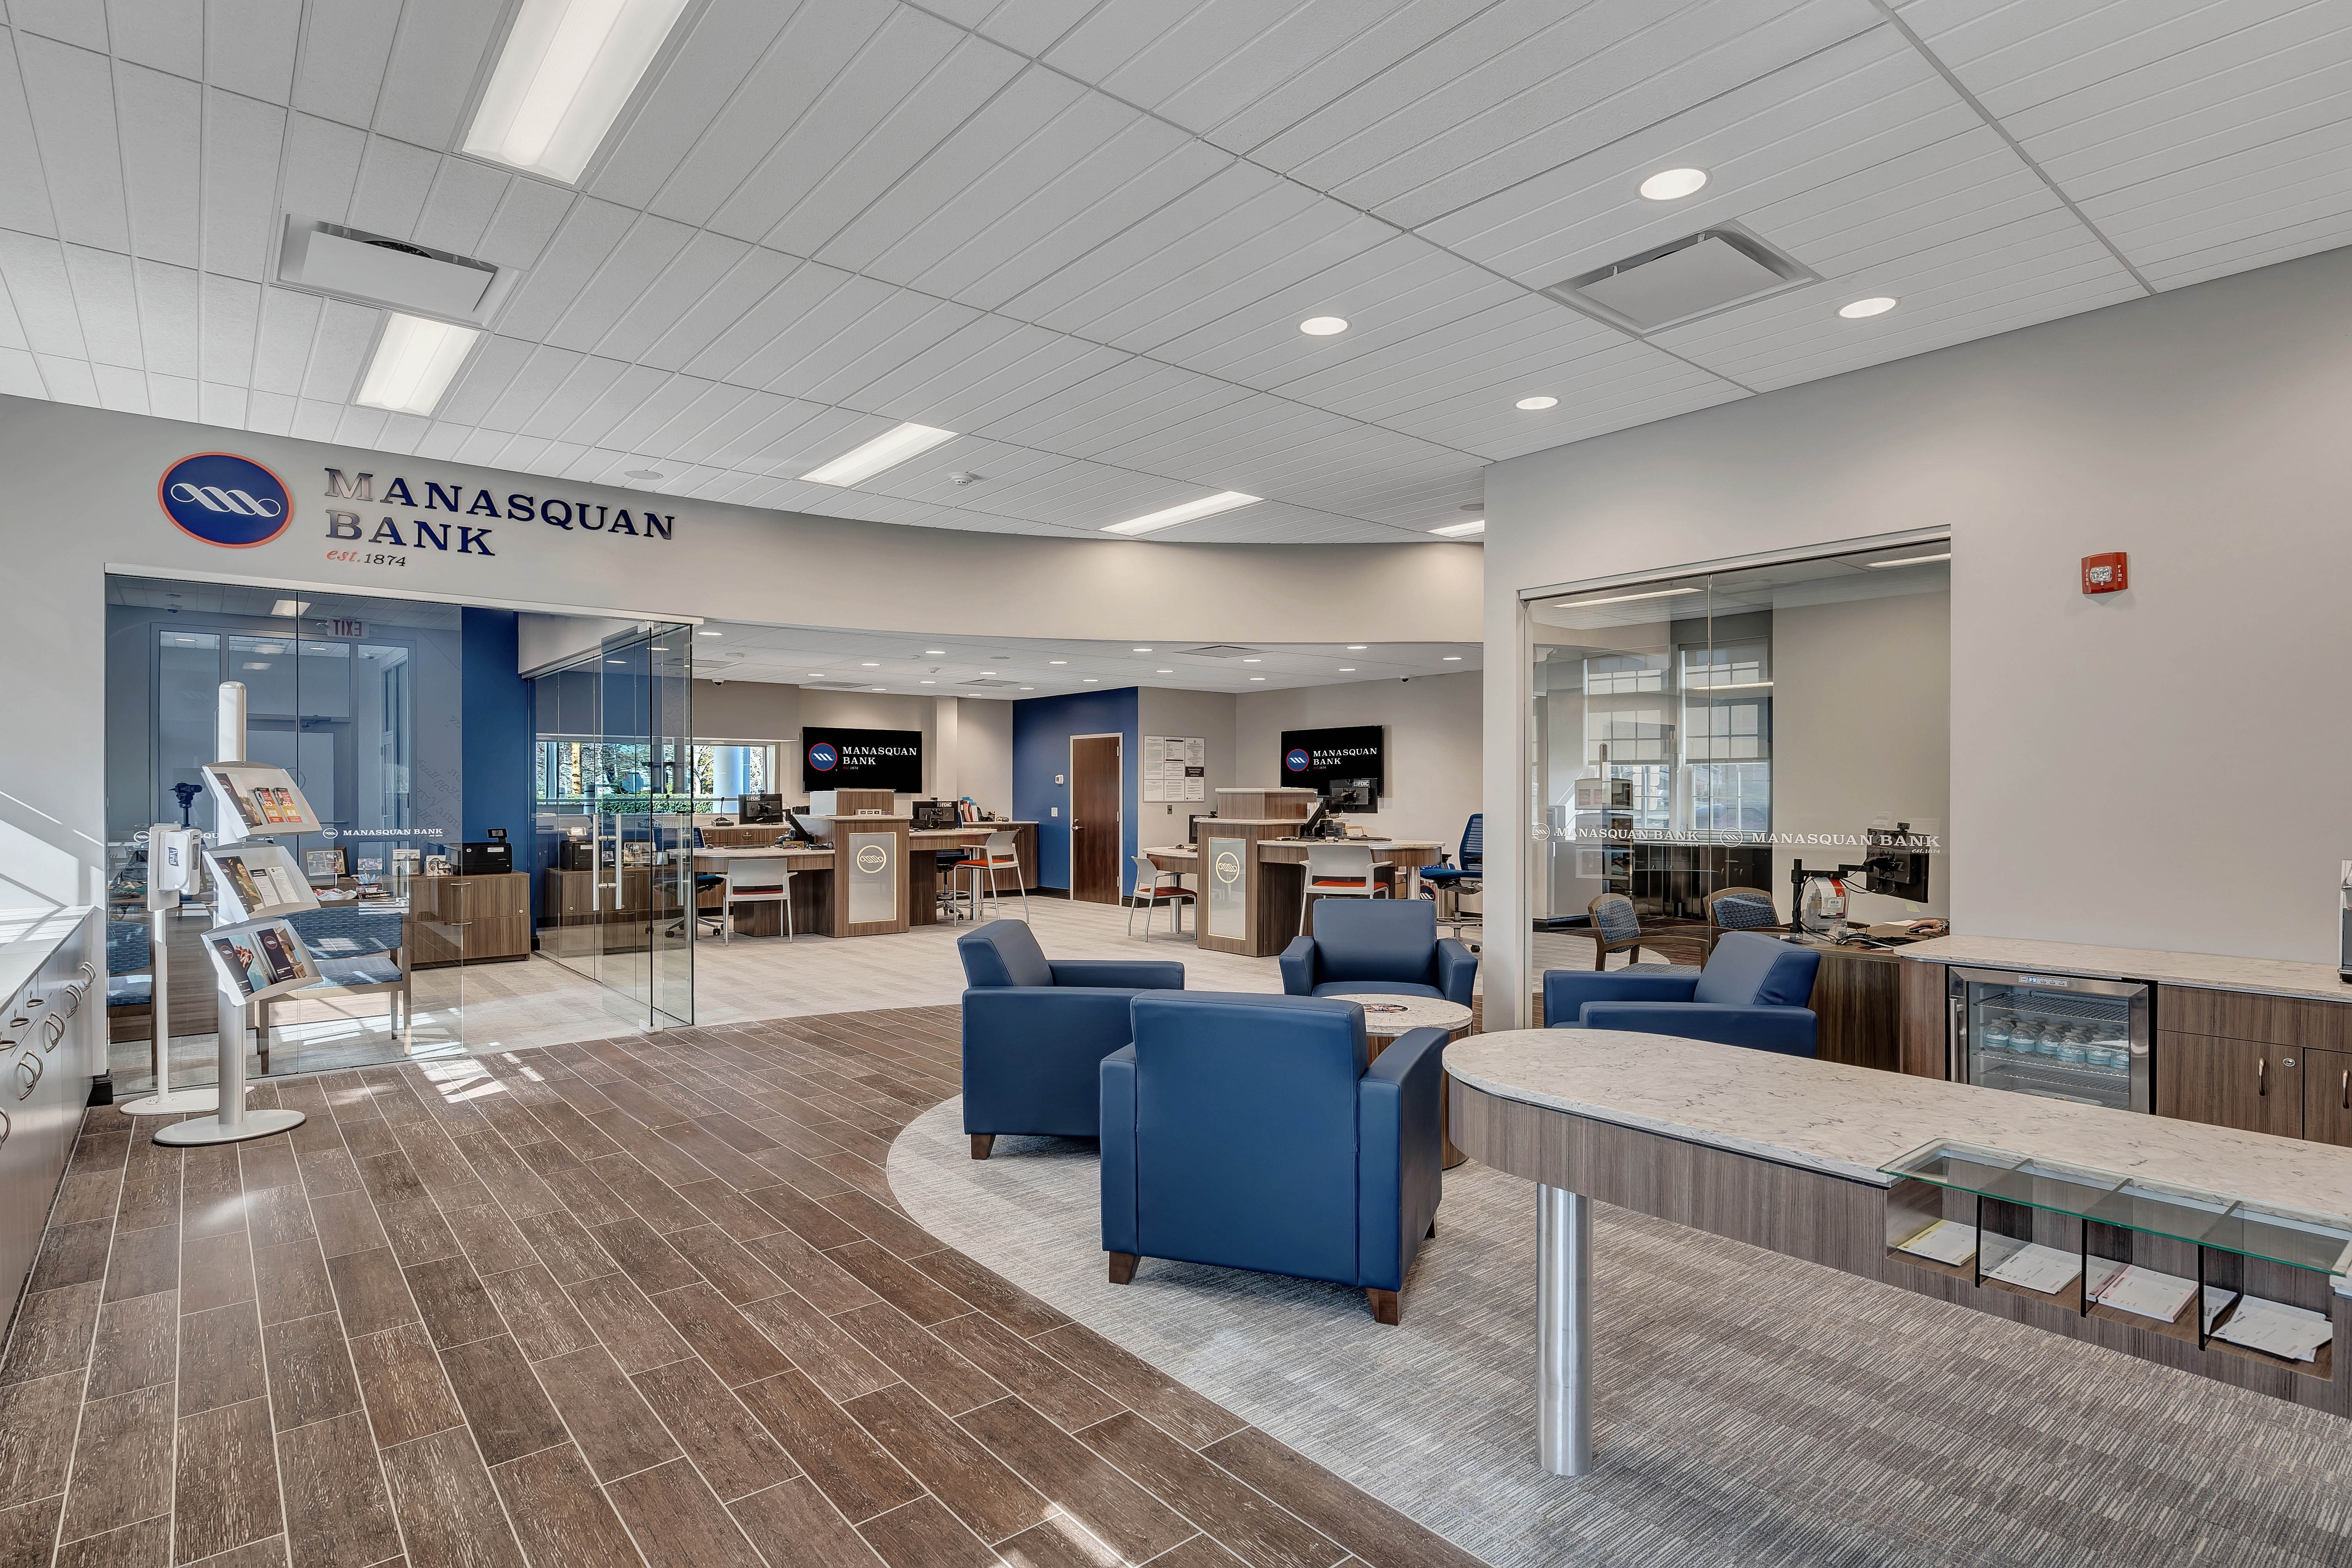 VISIT OUR NEWLY RENOVATED POINT PLEASANT BRANCH